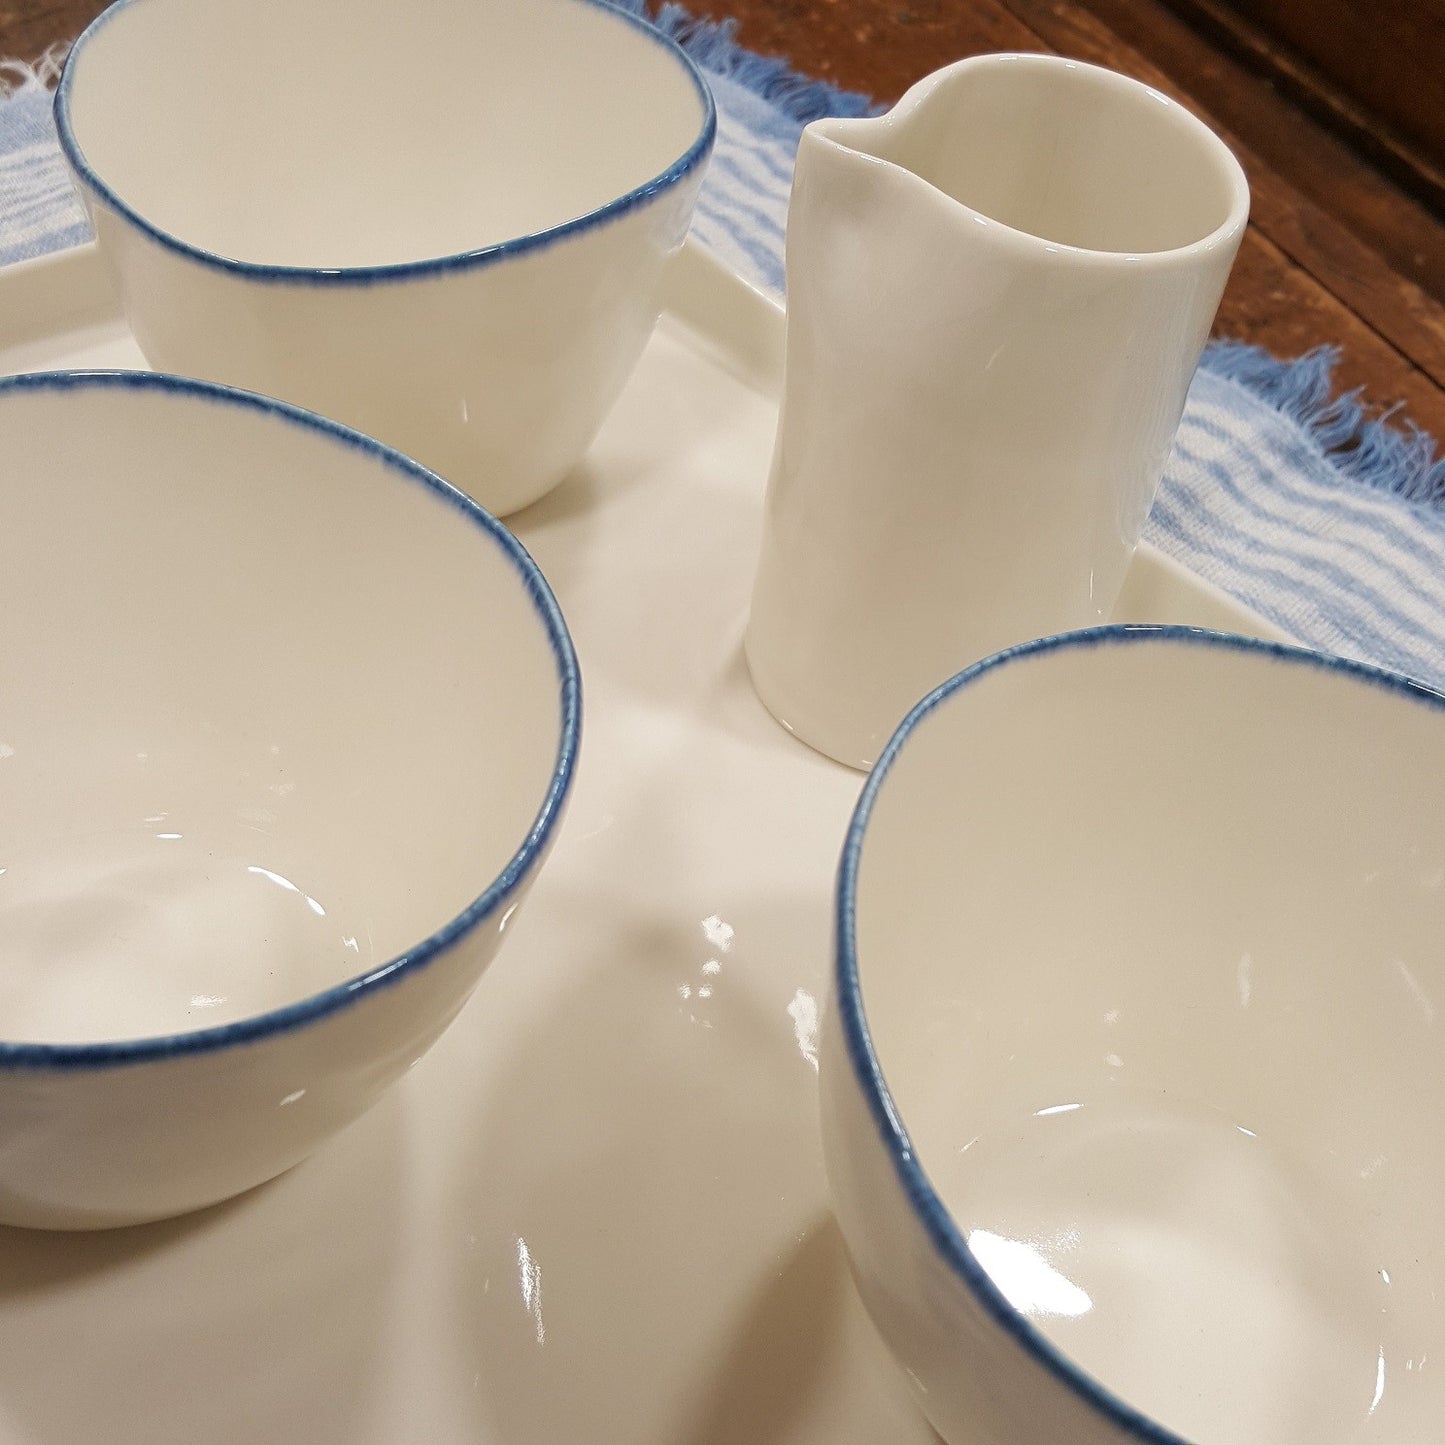 Porcelain coffee service with tray and milk jug